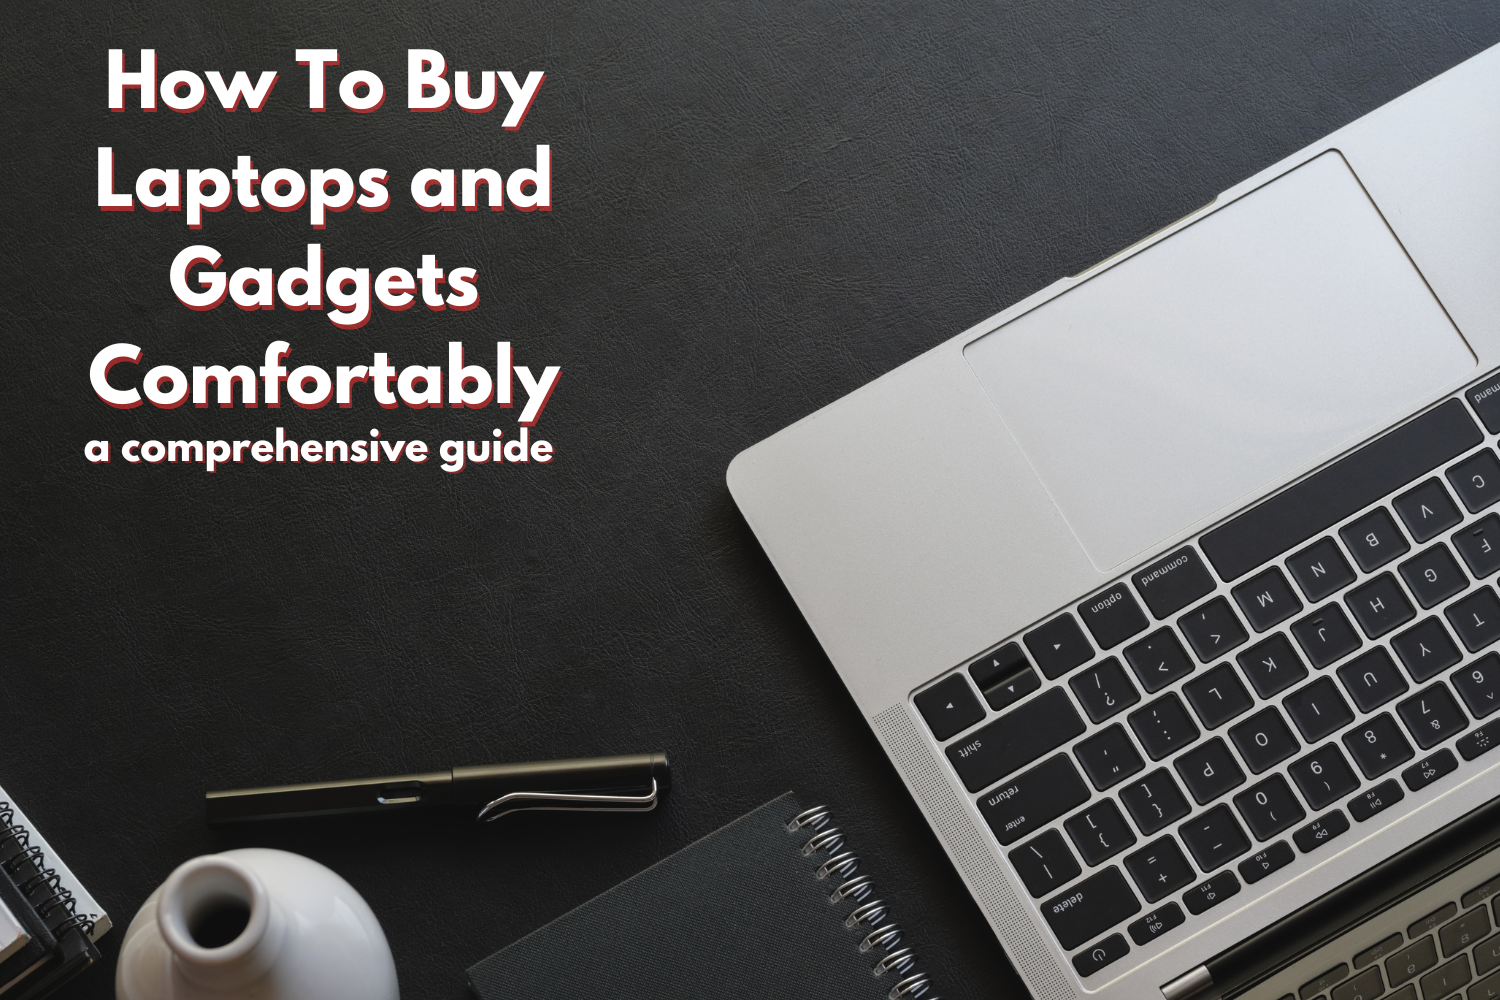 How To Buy Laptops and Gadgets Comfortably